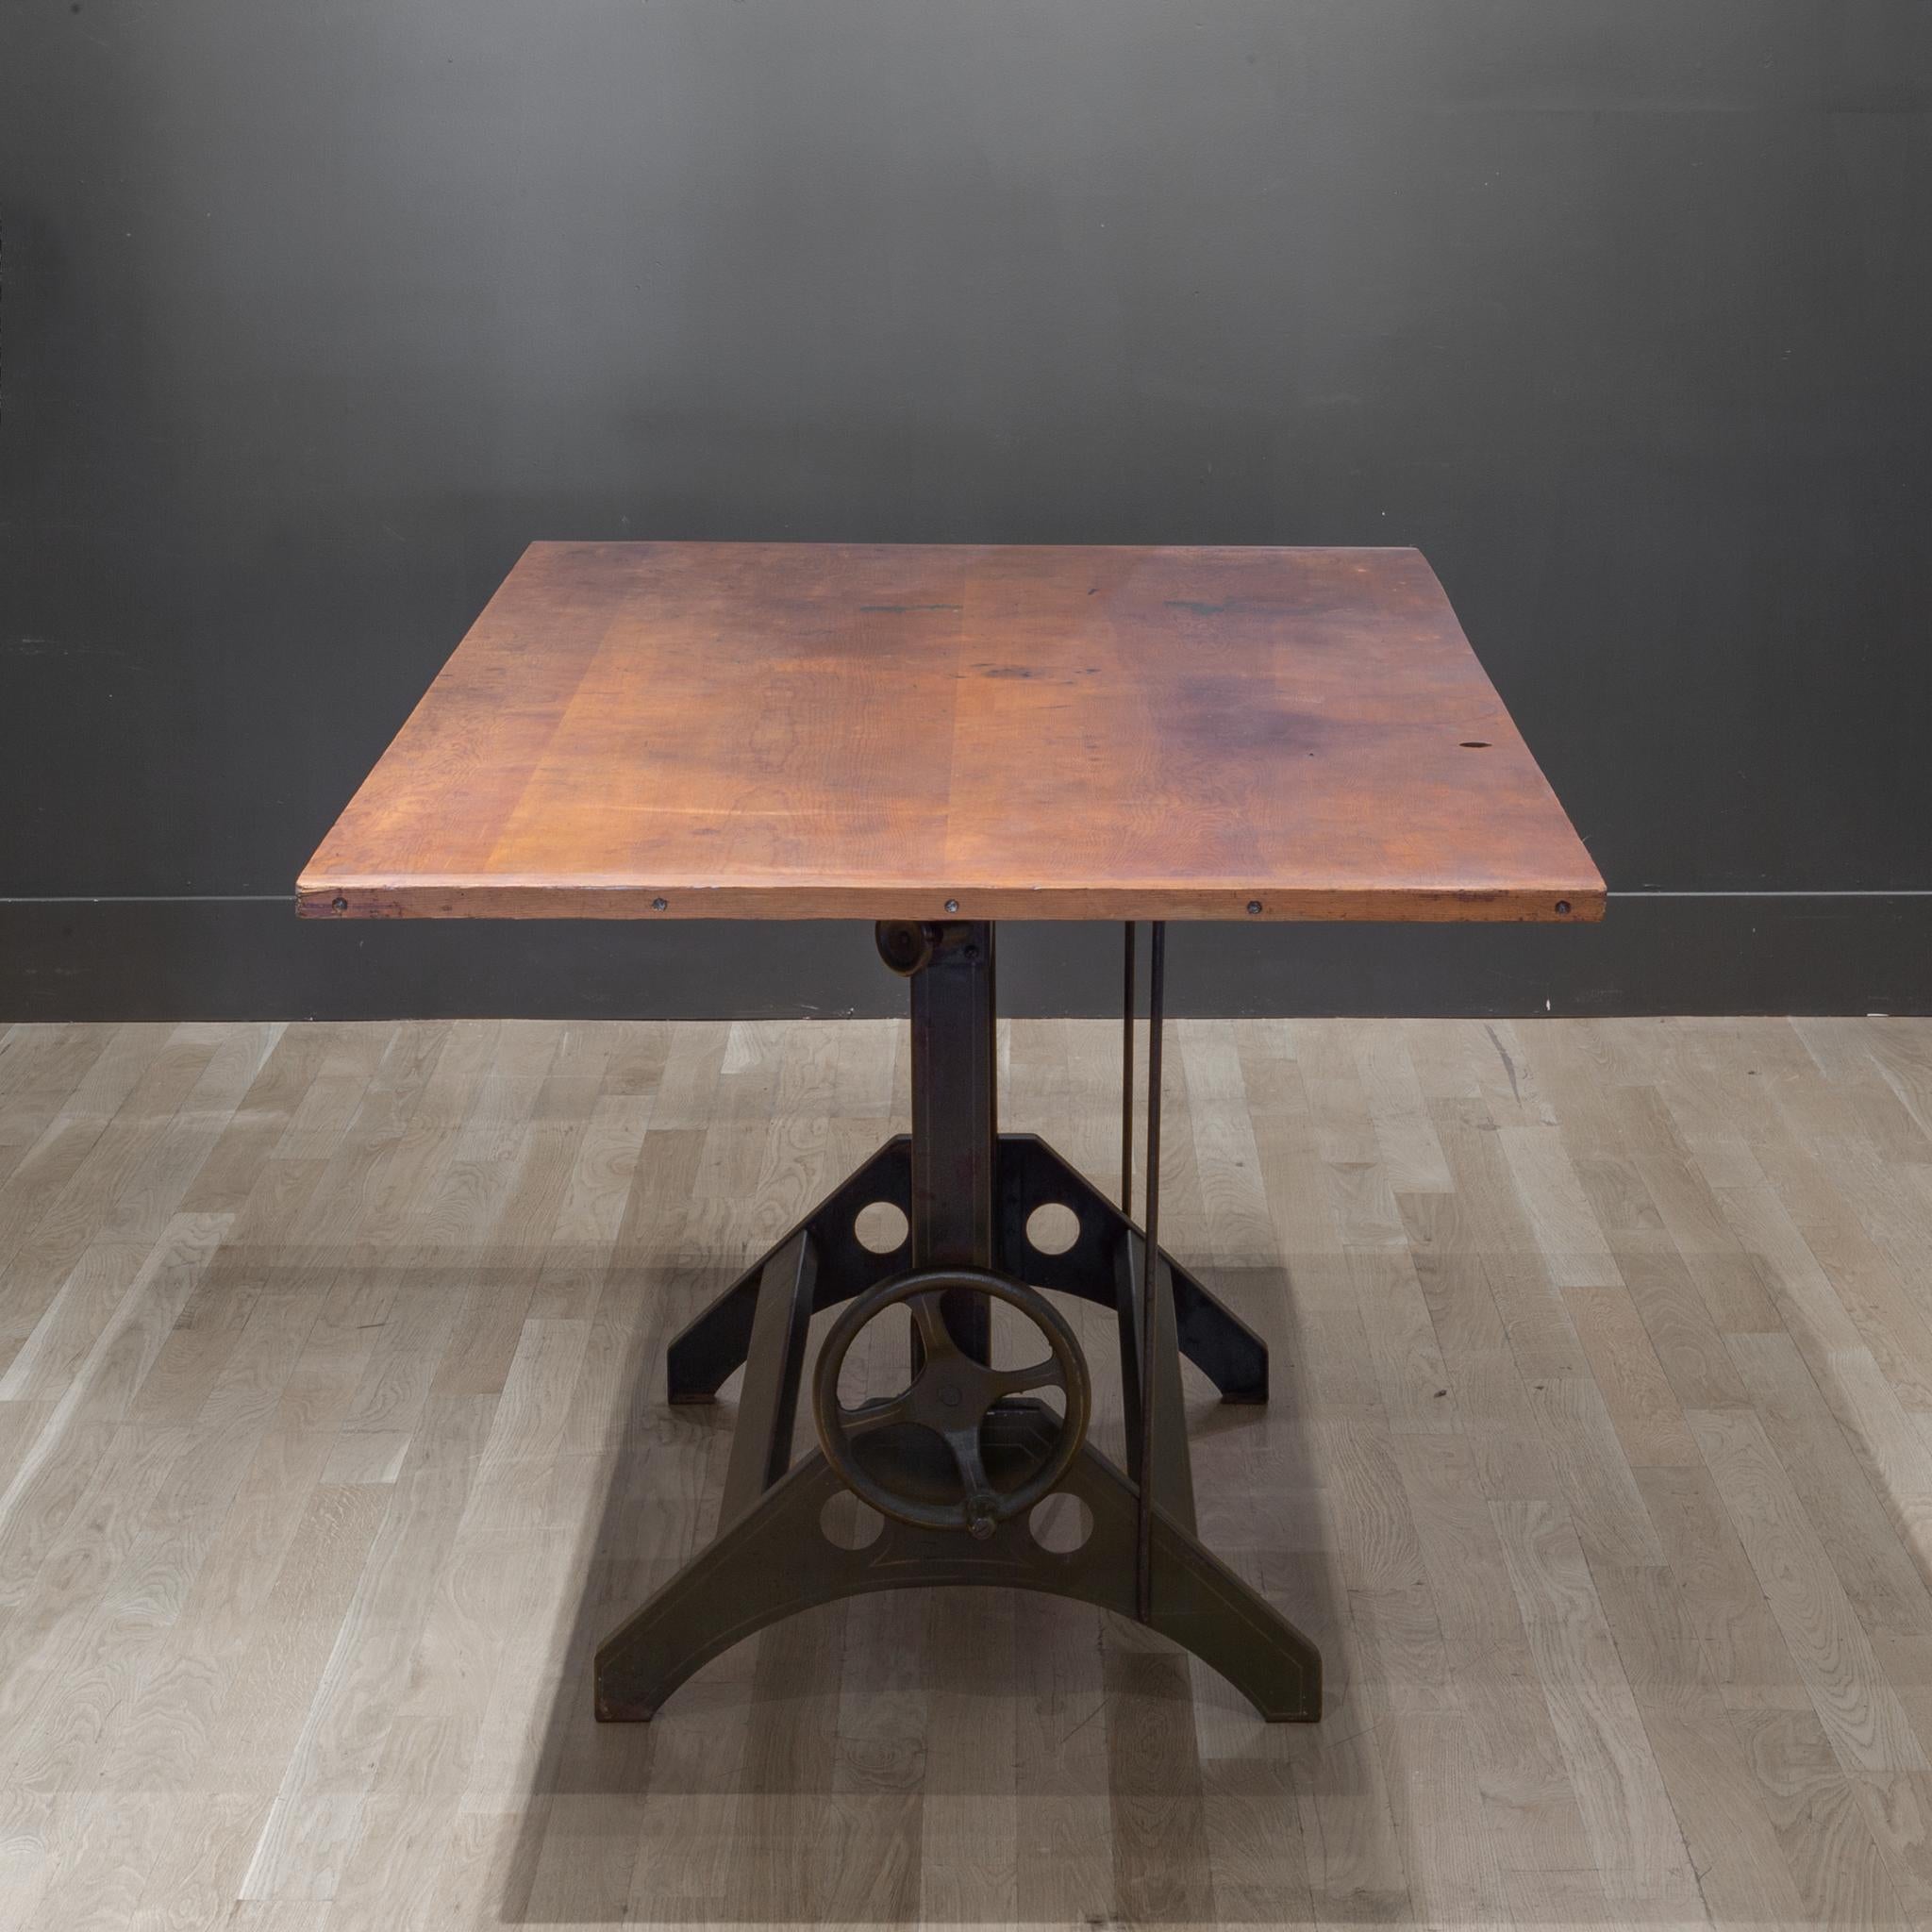 About

An industrial steel drafting table with large, wooden top and large handle on the side. The steel base is an Army green with gold stripes. The table can be used as a dining table, desk or drafting table. If used as a drafting table, the